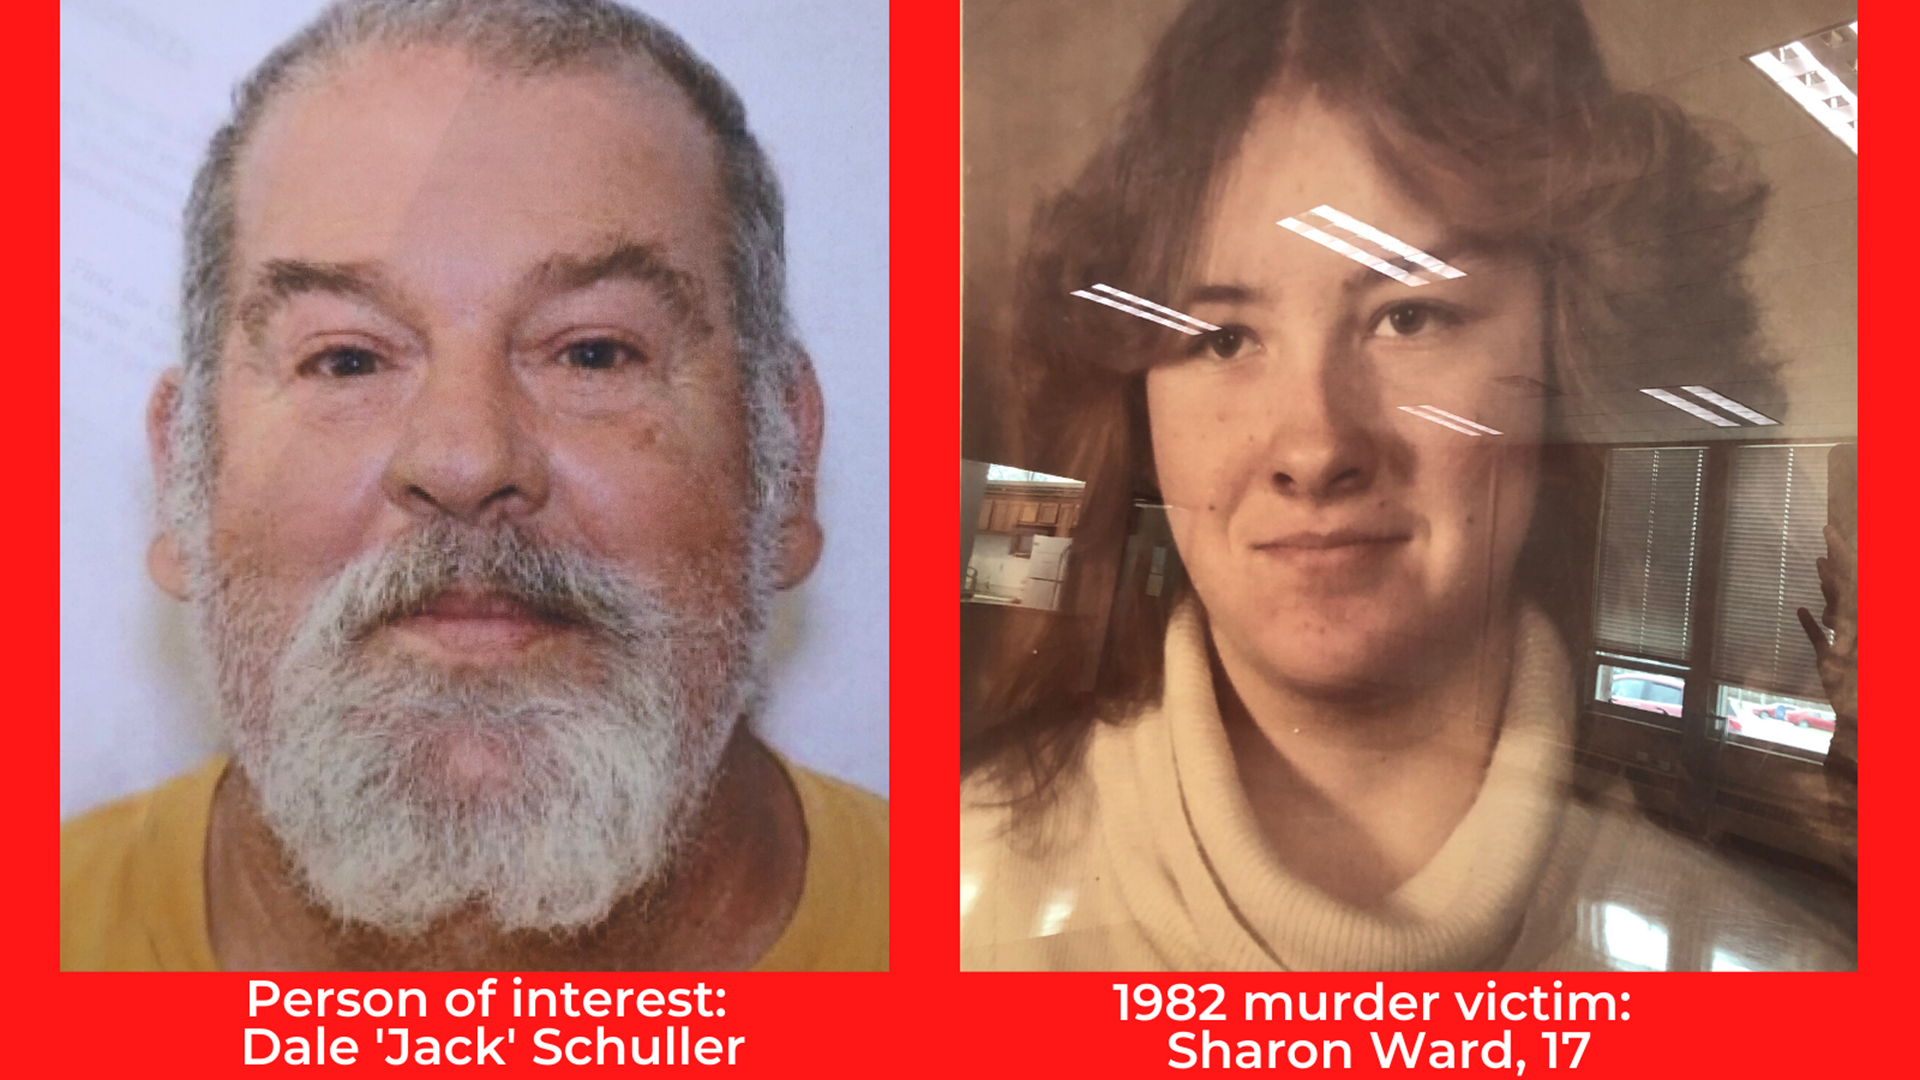 17-year-old Sharon Ward was killed nearly 40 years ago. Police have listed Dale Schuller, also known as Jack Schuller, as "person of interest."